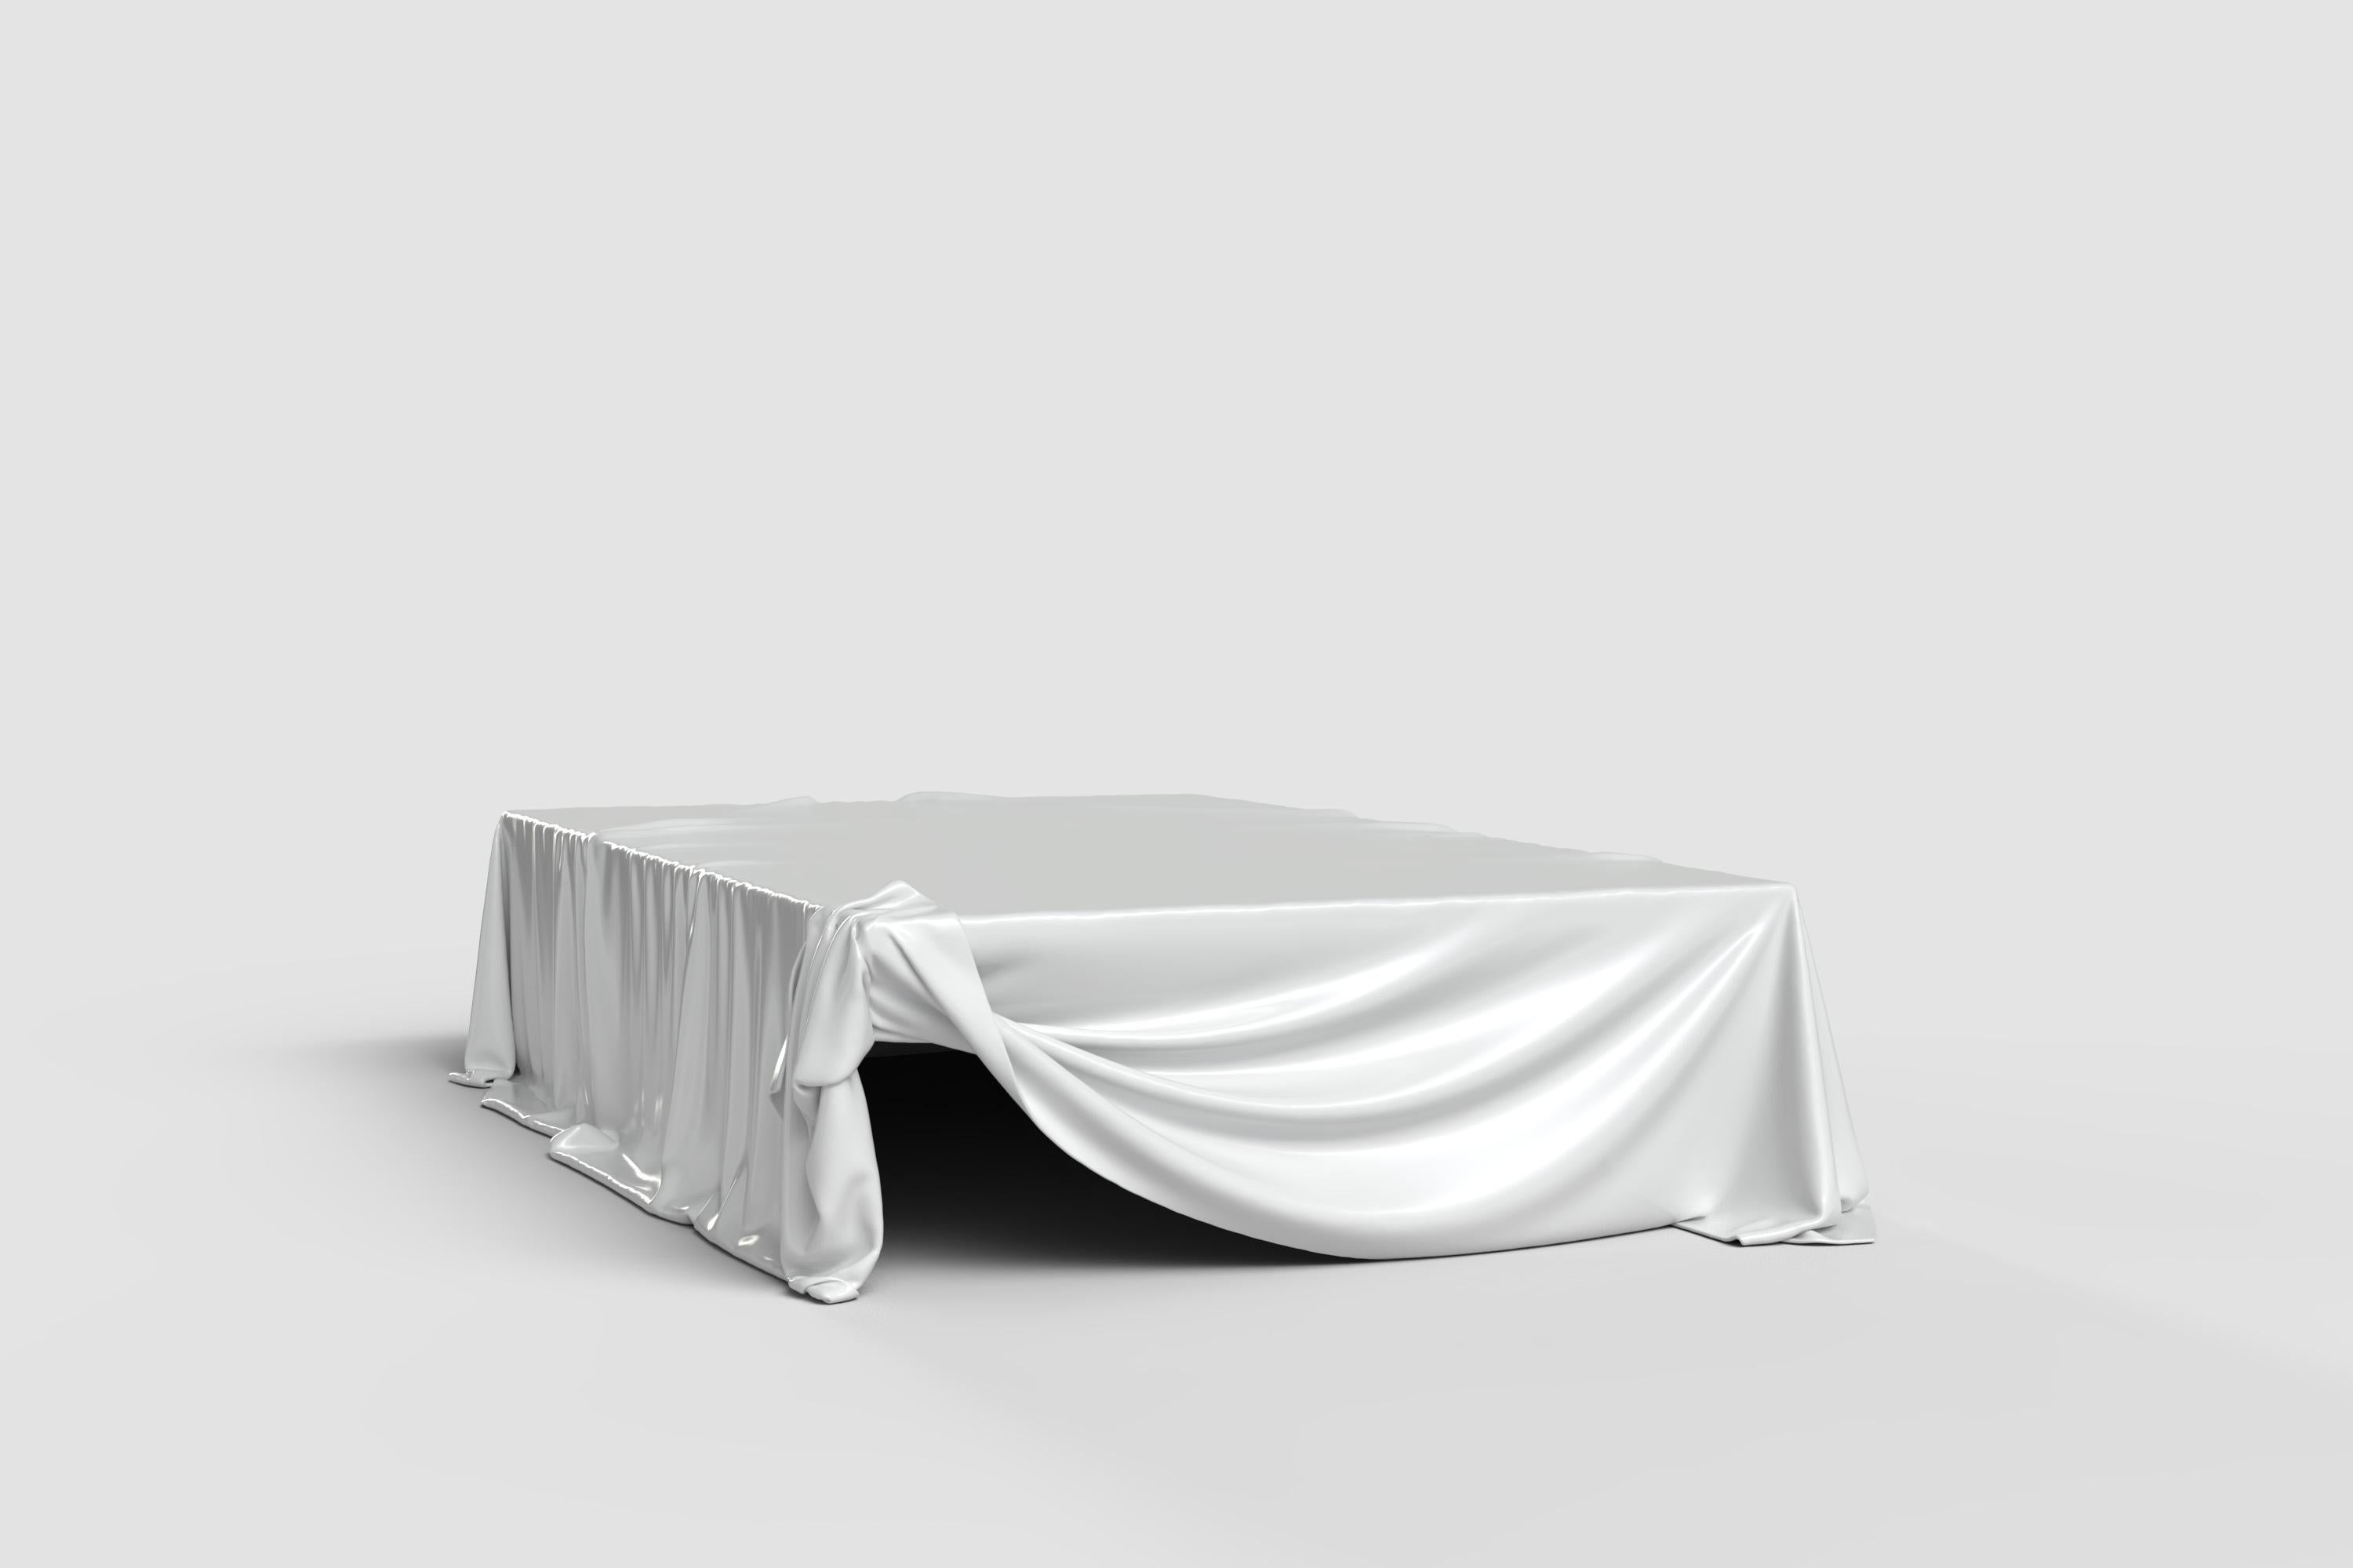 Capturing the ephemeral grace of draped fabric, the Levitaz Coffee Table in White Gloss is a masterclass in sculptural design. Its contours, evocative of a silken veil caught in a gentle gust, freeze a moment of fluid elegance in time. The table’s